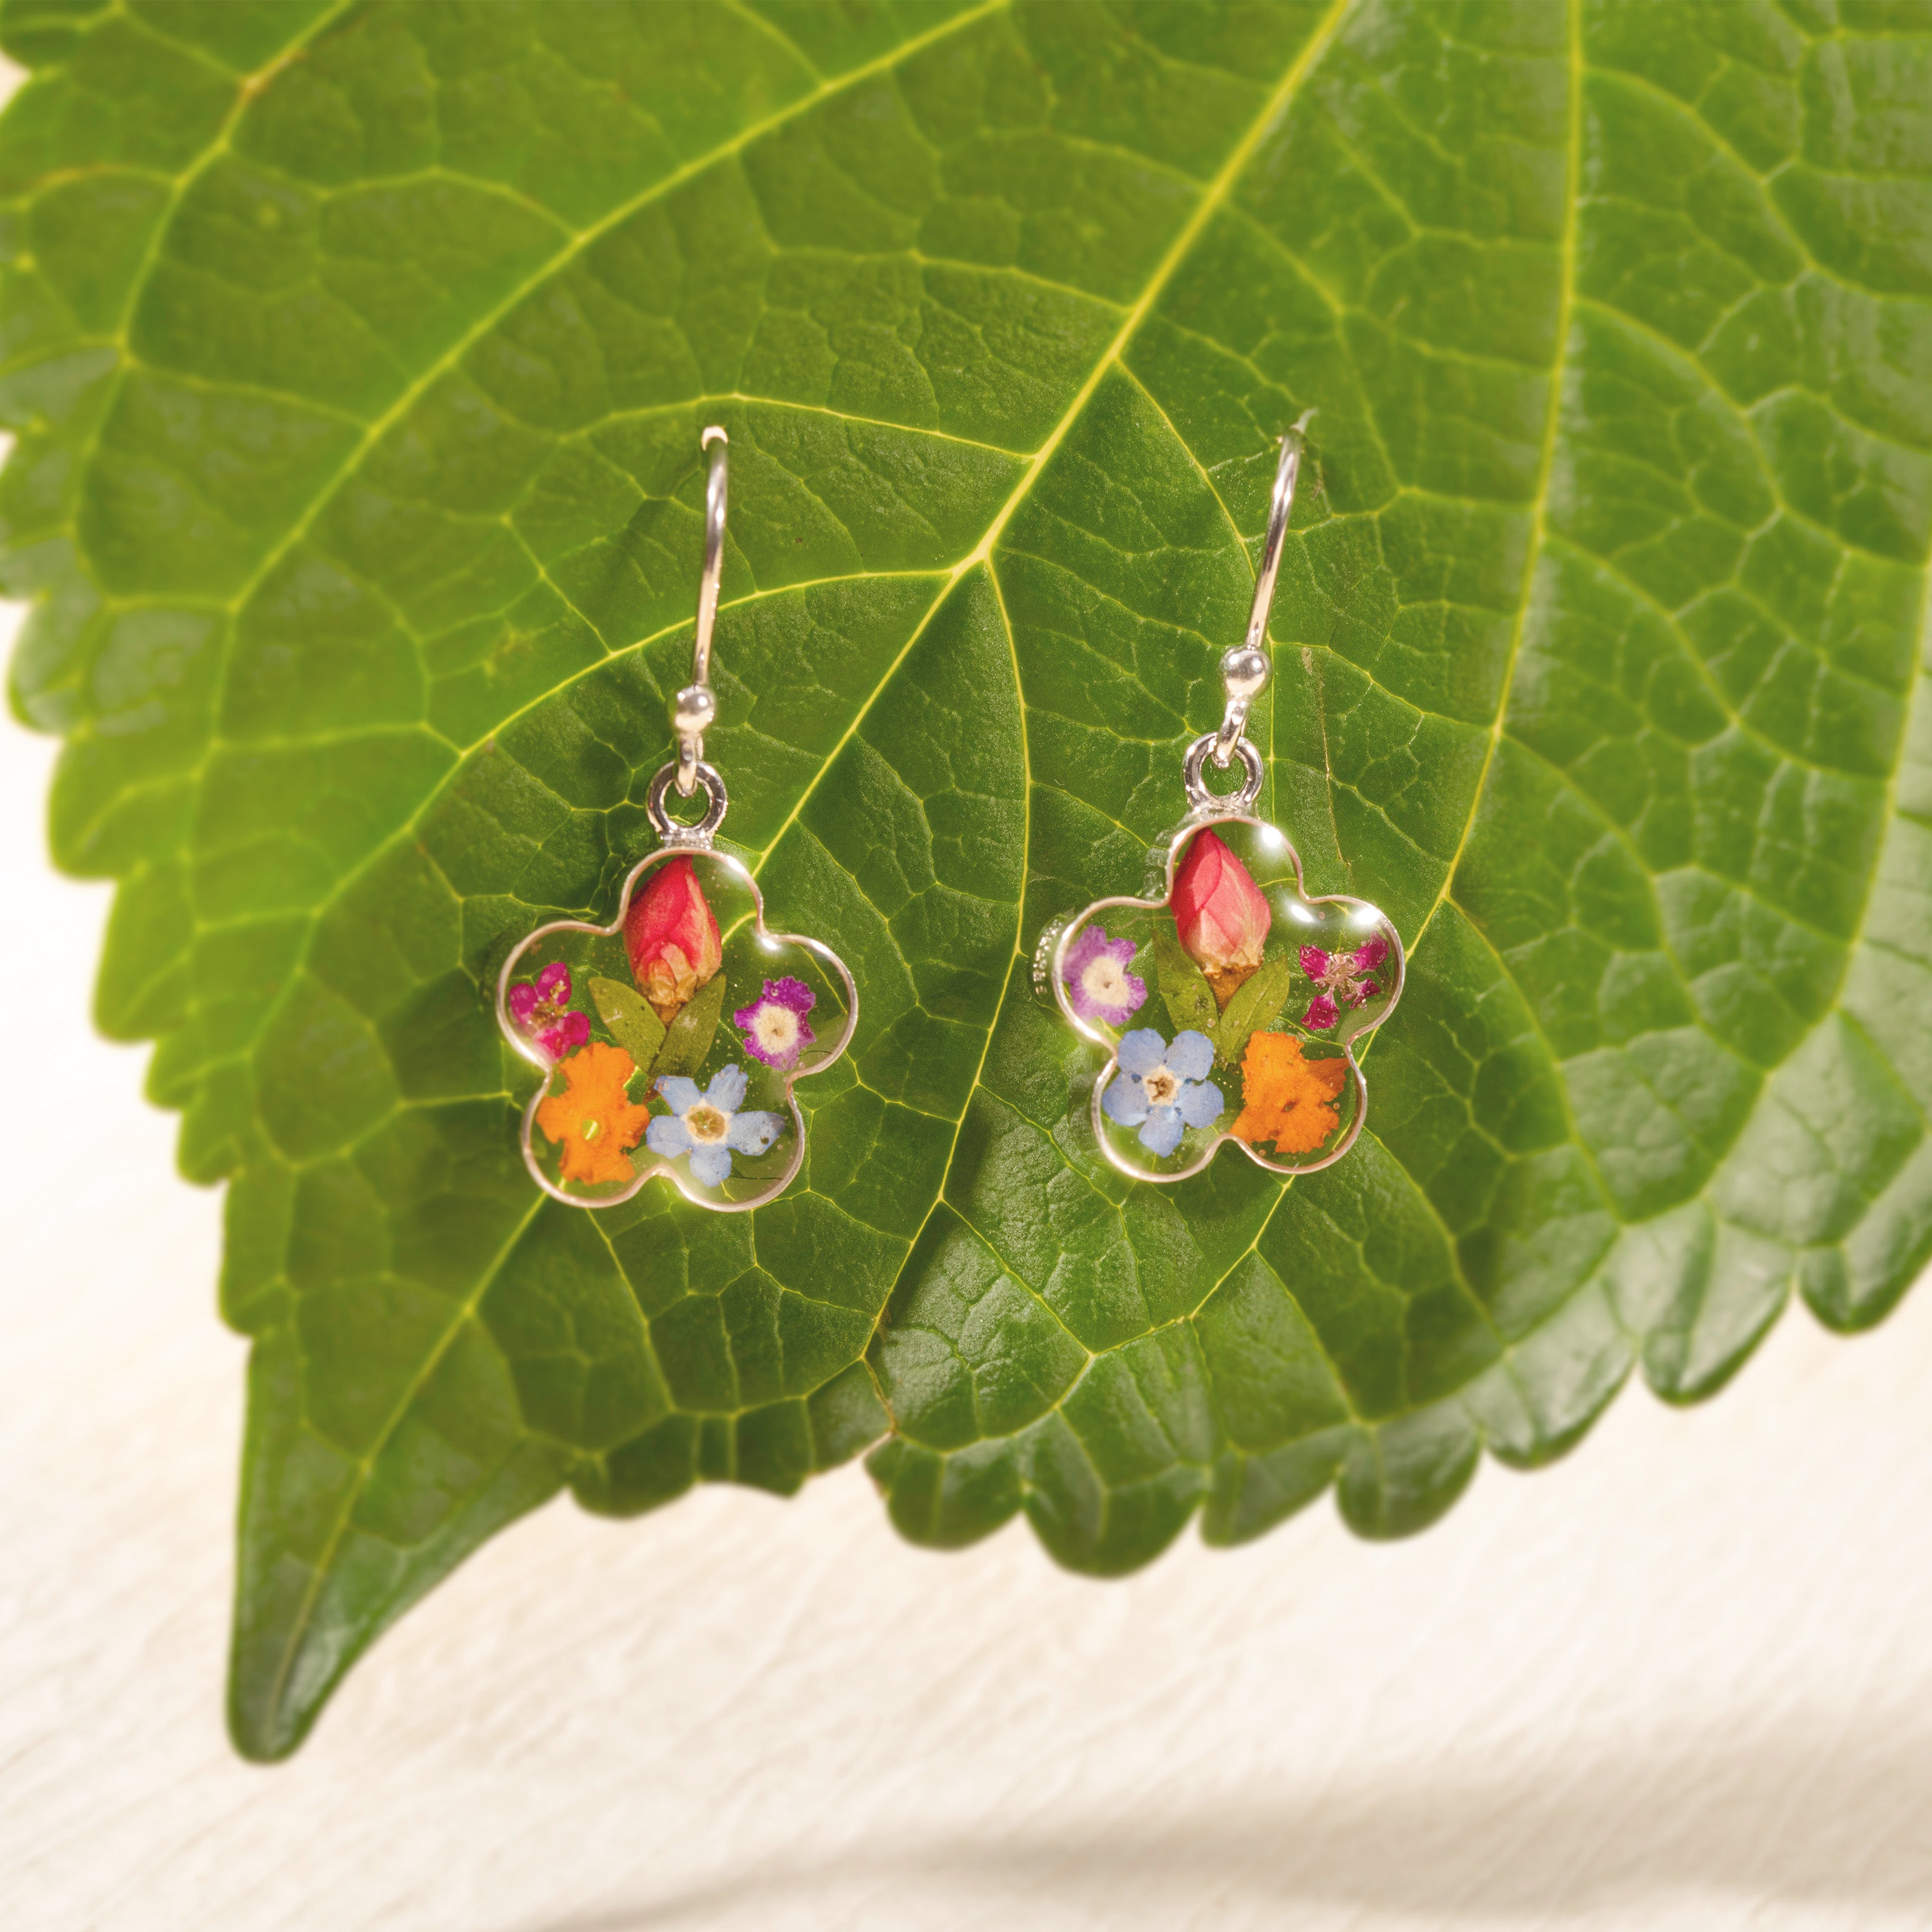 Dira Earrings with Multi Colored Flowers